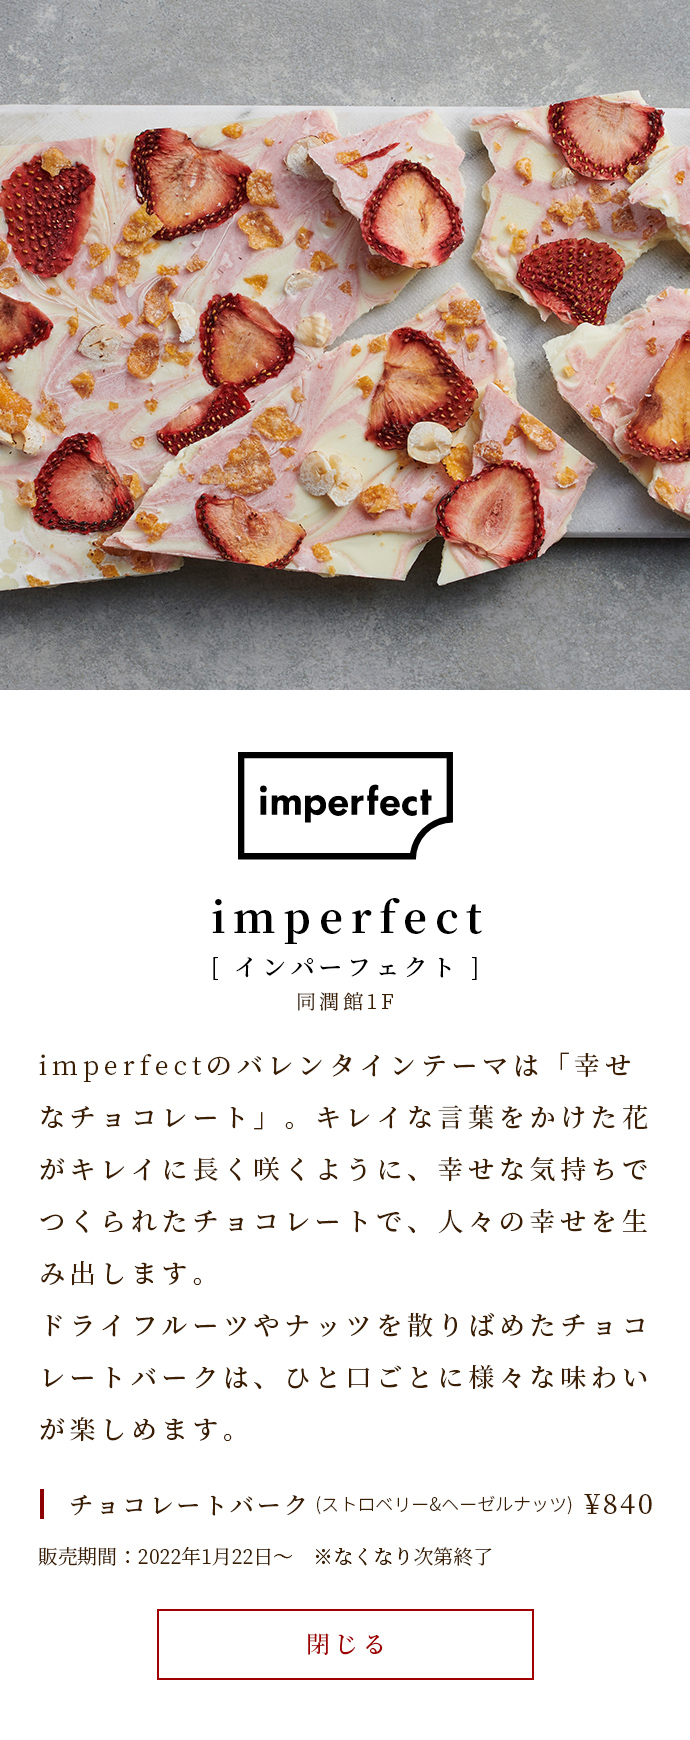 imperfect's Valentine theme is "happy chocolate". Chocolate made with a happy feeling creates happiness for people, just as flowers with beautiful words bloom beautifully for a long time. Chocolate Bark studded with dried fruits and nuts can be enjoyed in various flavors with each bite. Chocolate Bark (strawberry & hazelnut) ￥ 840 Sale period: January 22, 2022 ~ * Ends as soon as it runs out